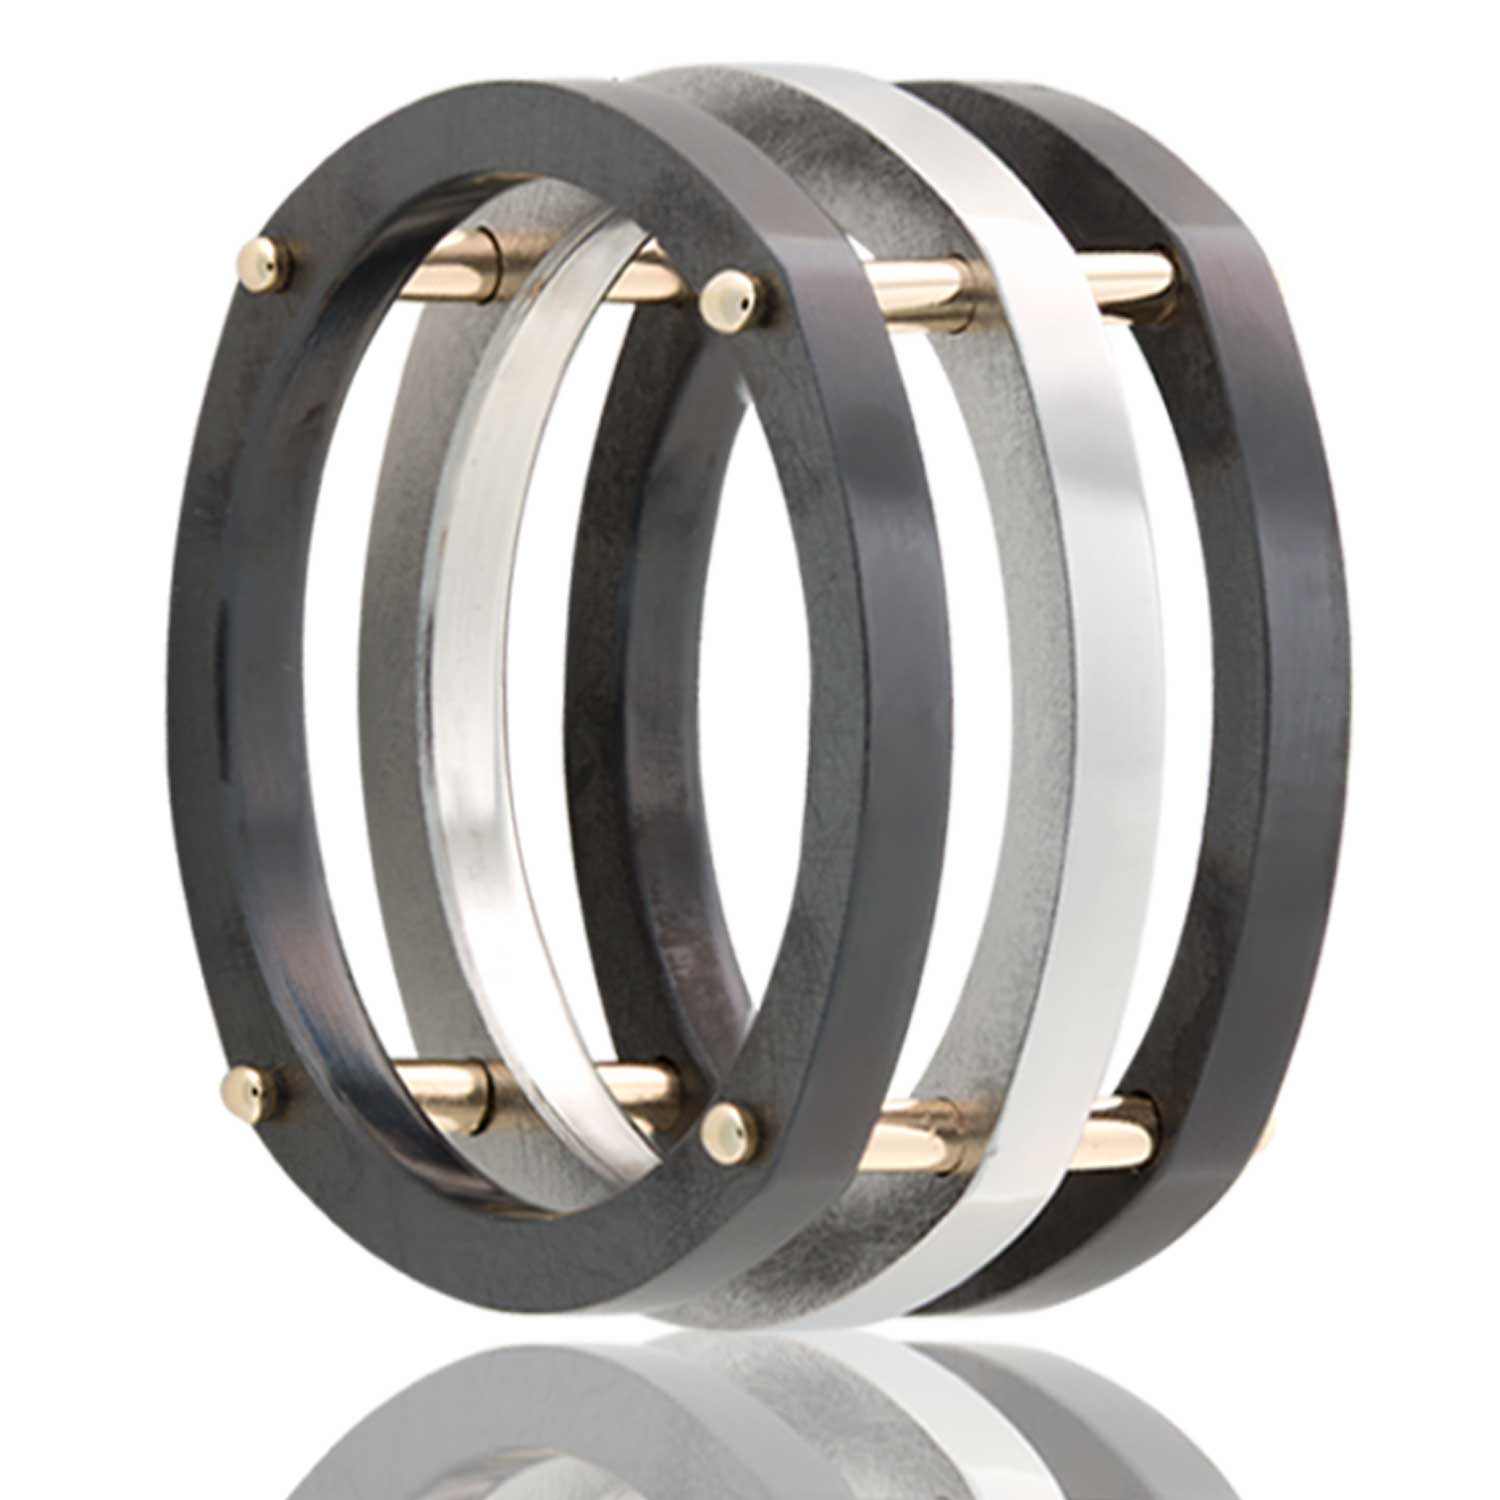 A zirconium men's wedding band with gold bars displayed on a neutral white background.